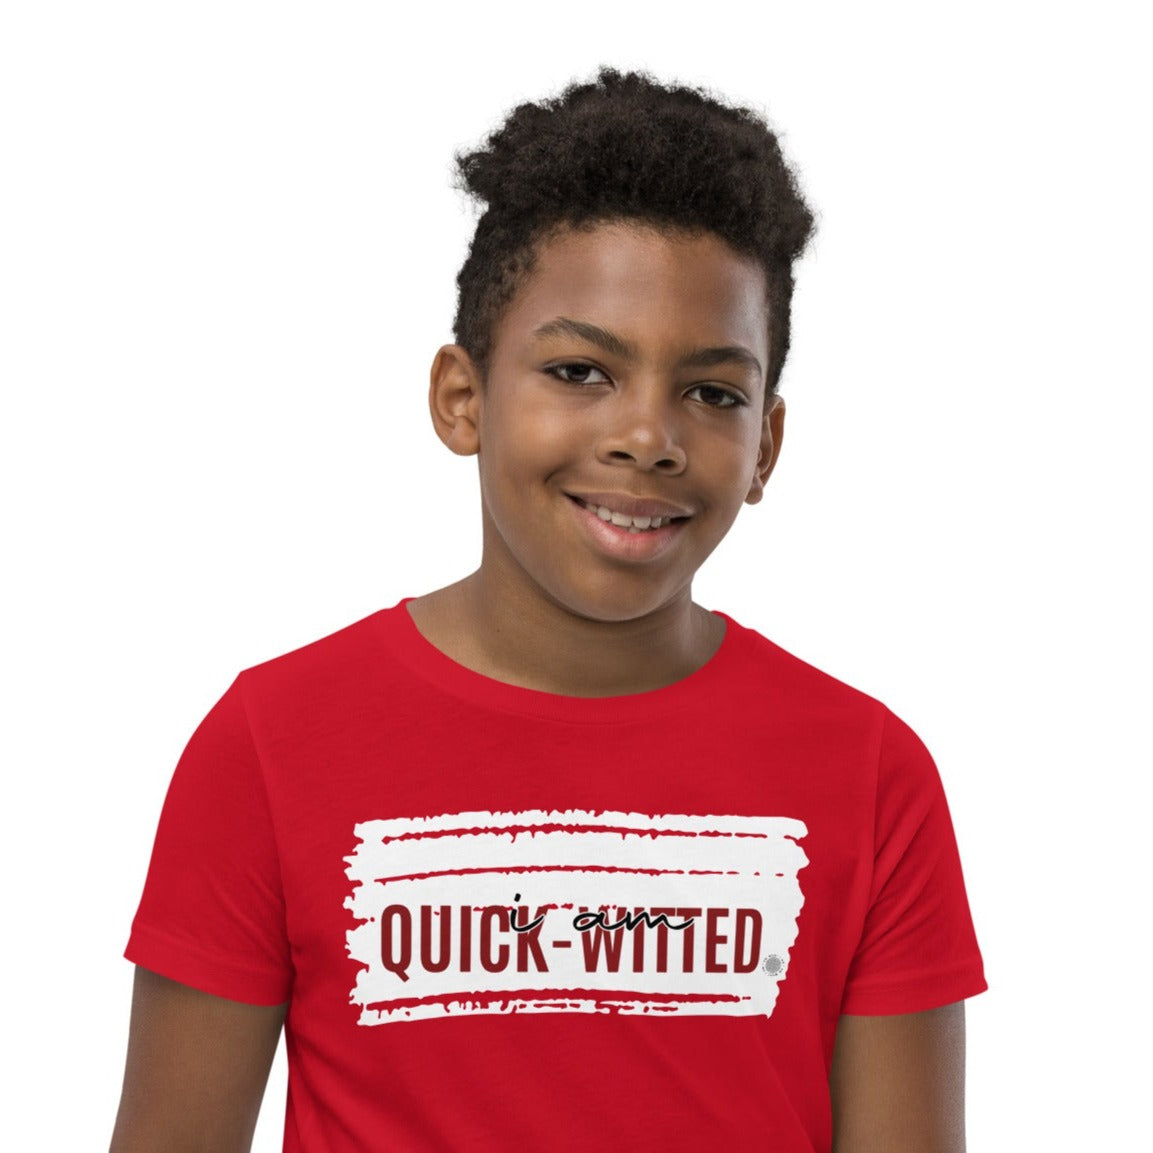 I Am Quick-witted Youth T-Shirt red